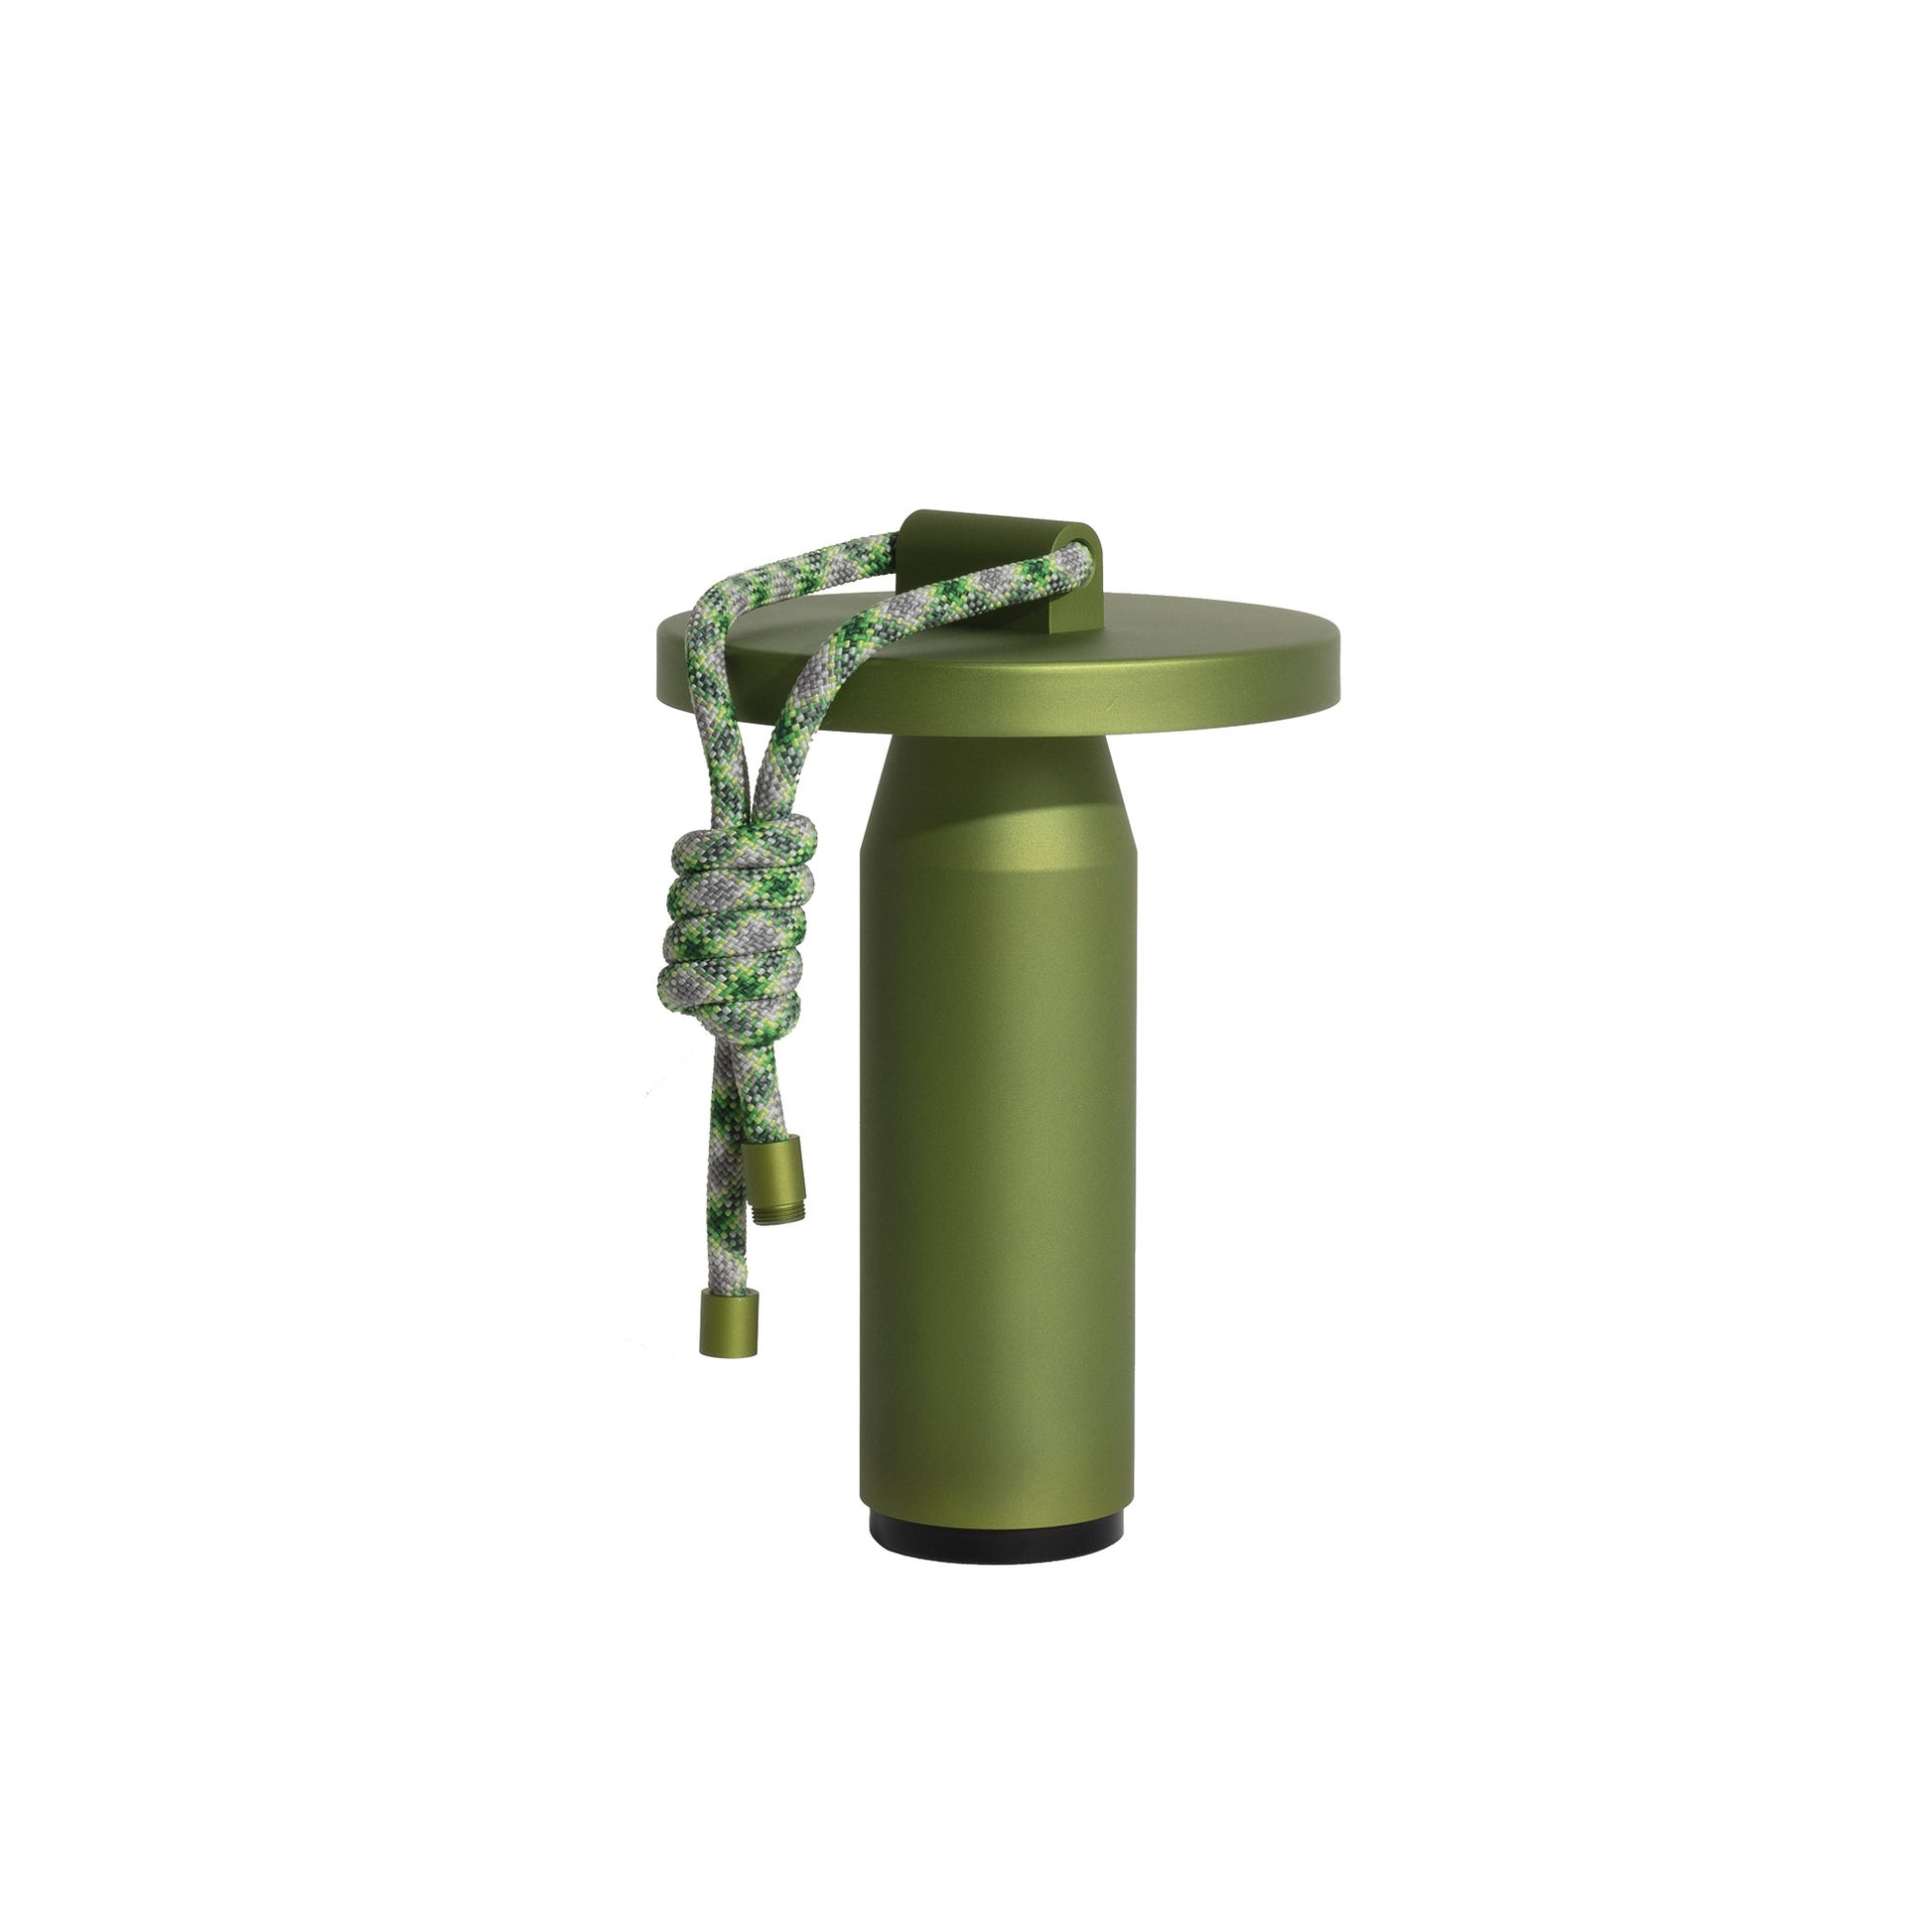 QUASAR Portable Lamp by Petite Friture #Olive Green